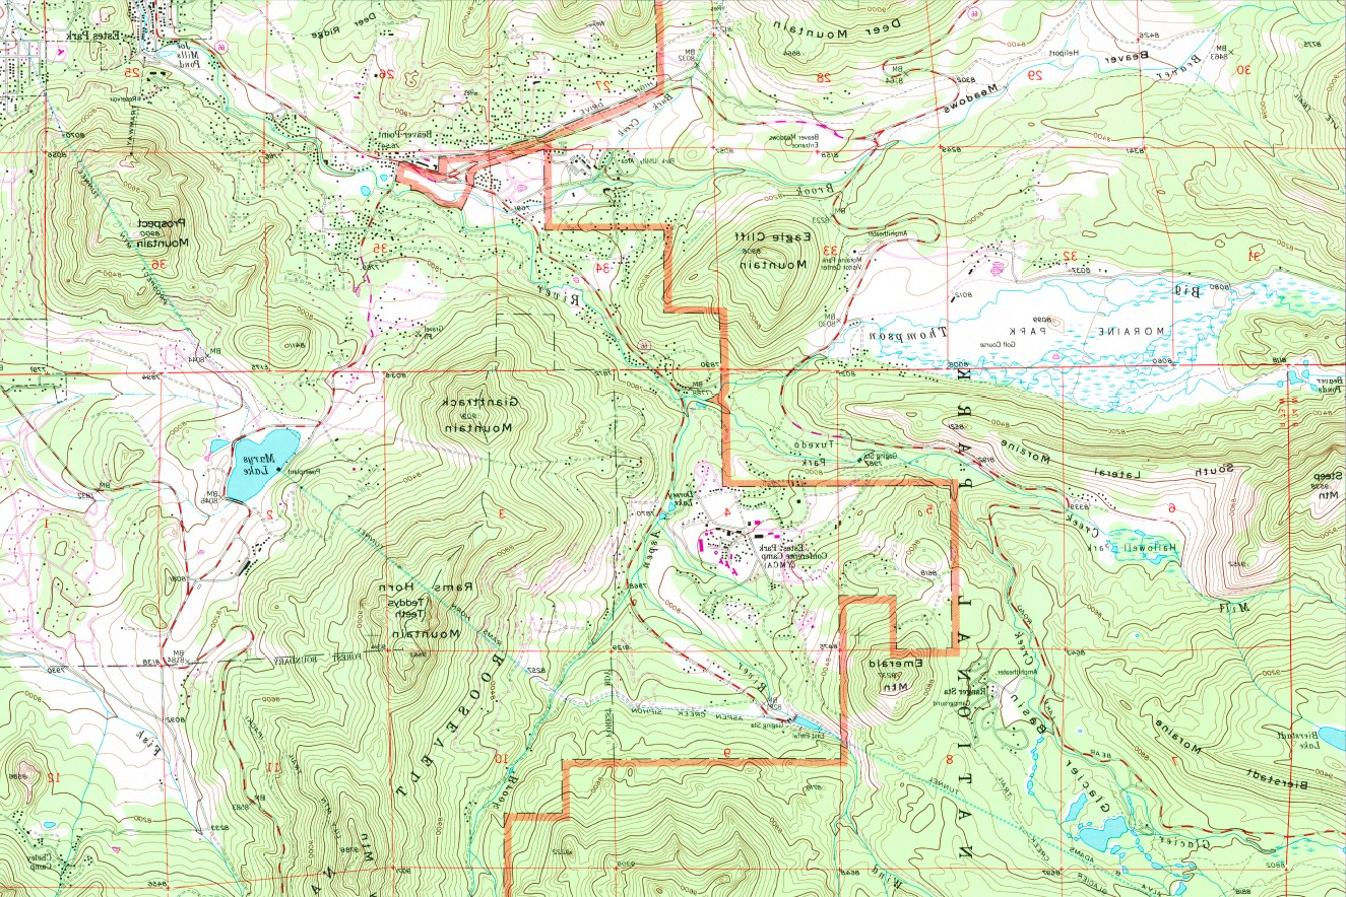 USGS quadrant map from near Rocky Mountain National Park